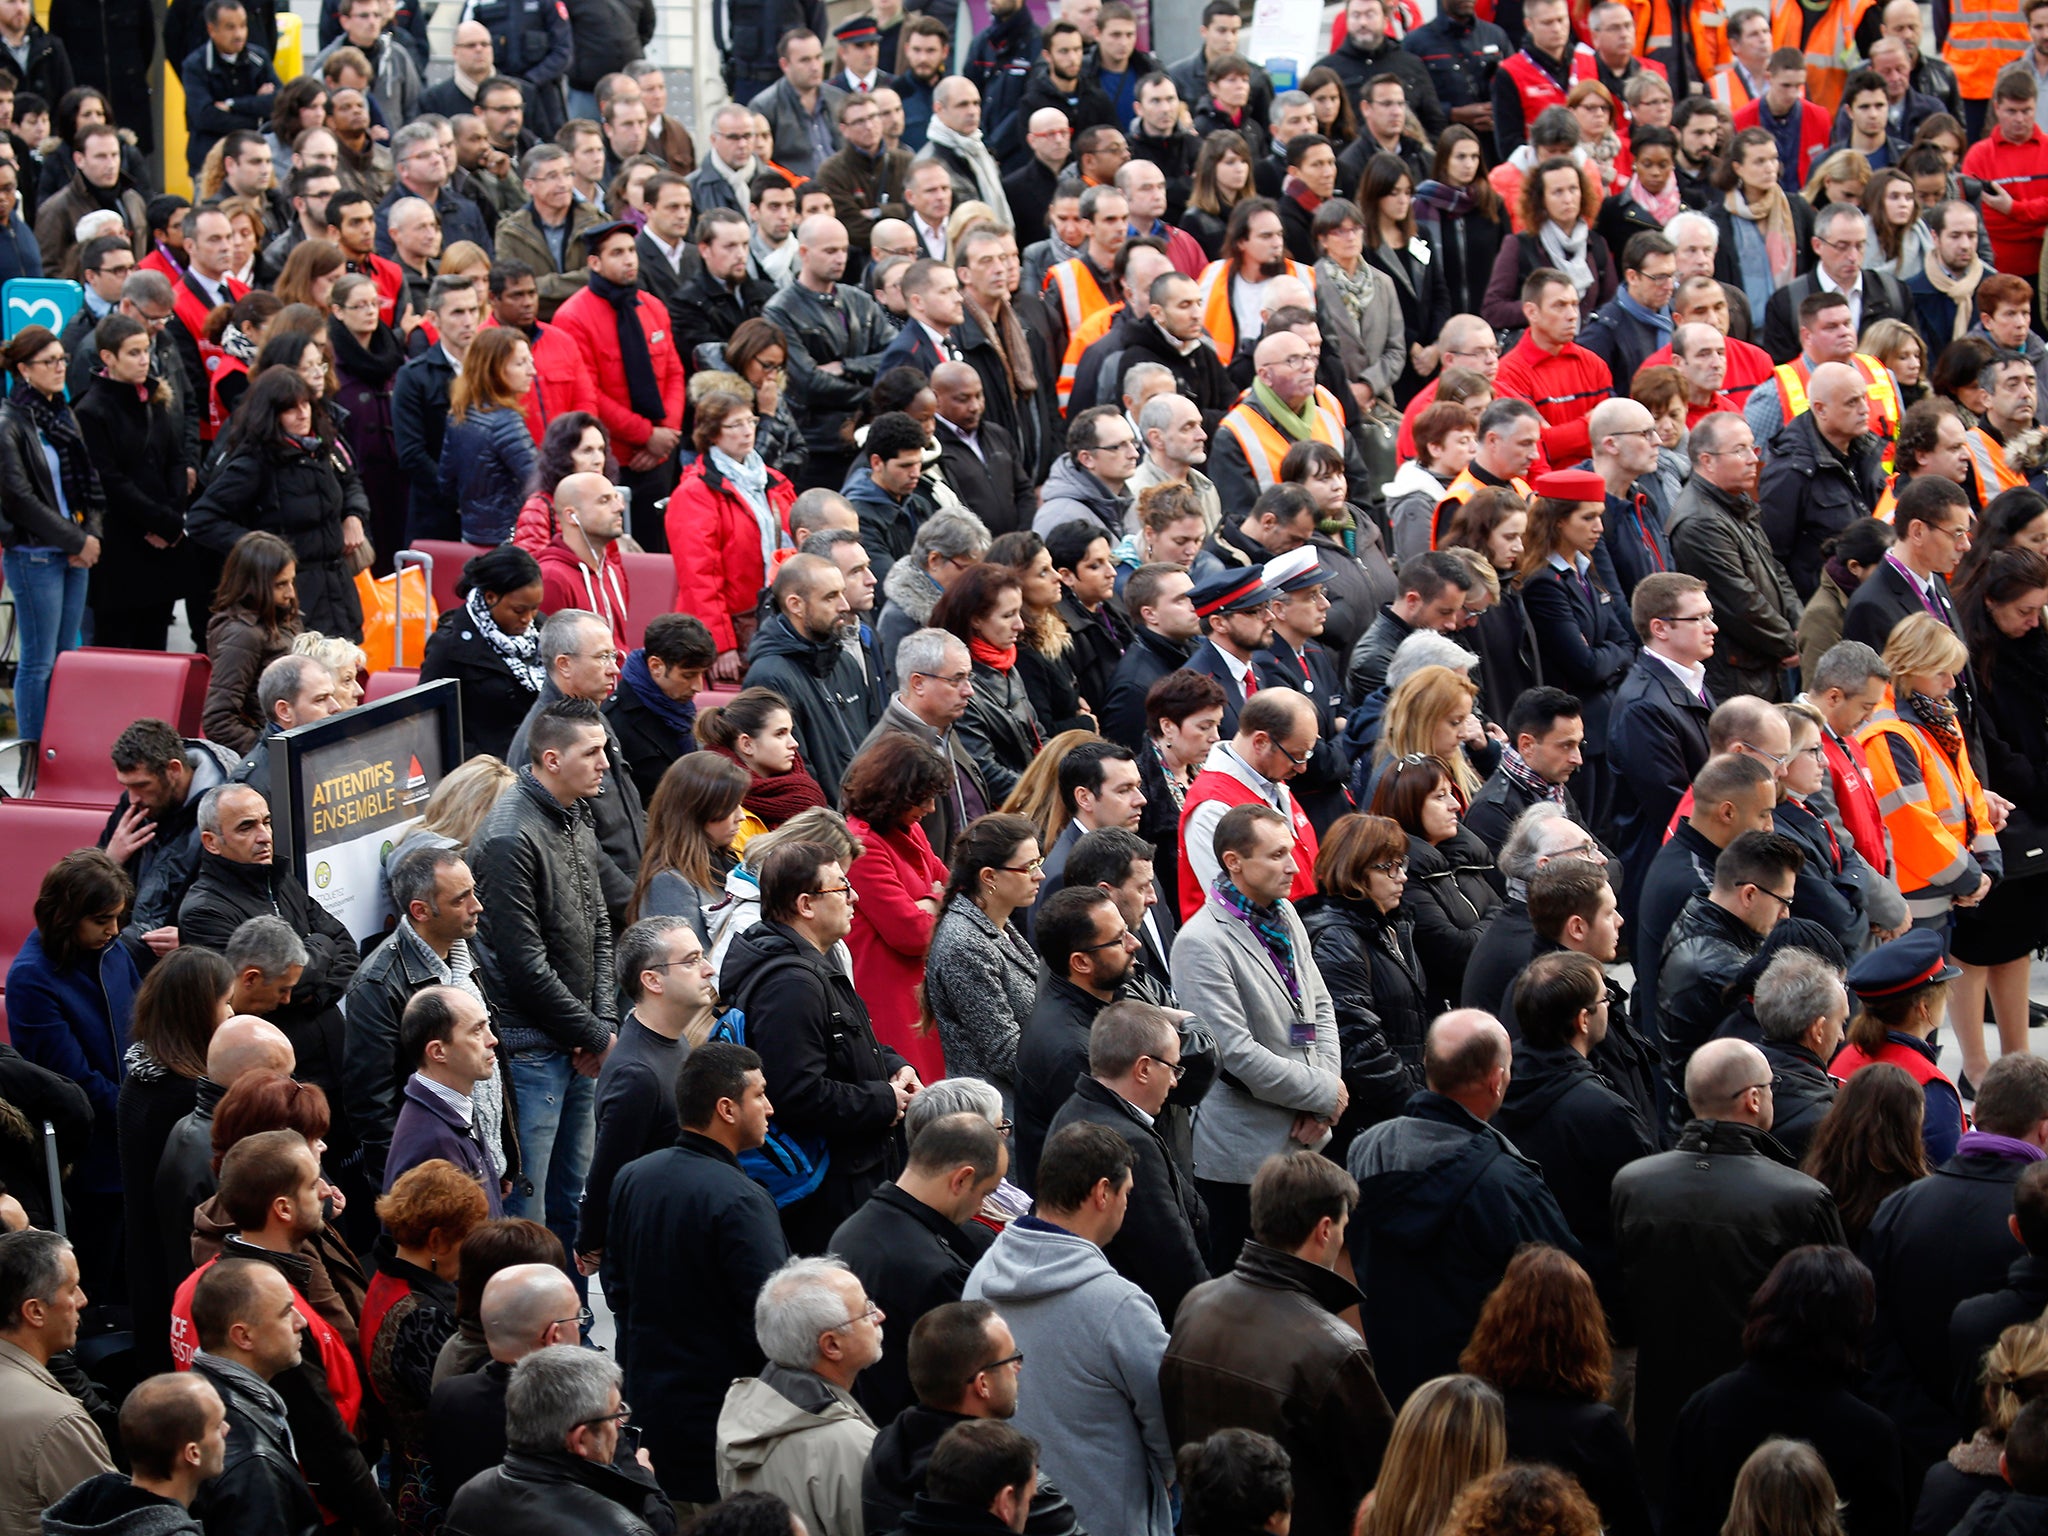 People stand for a minute of silence at the Gare de Lyon train station in Paris